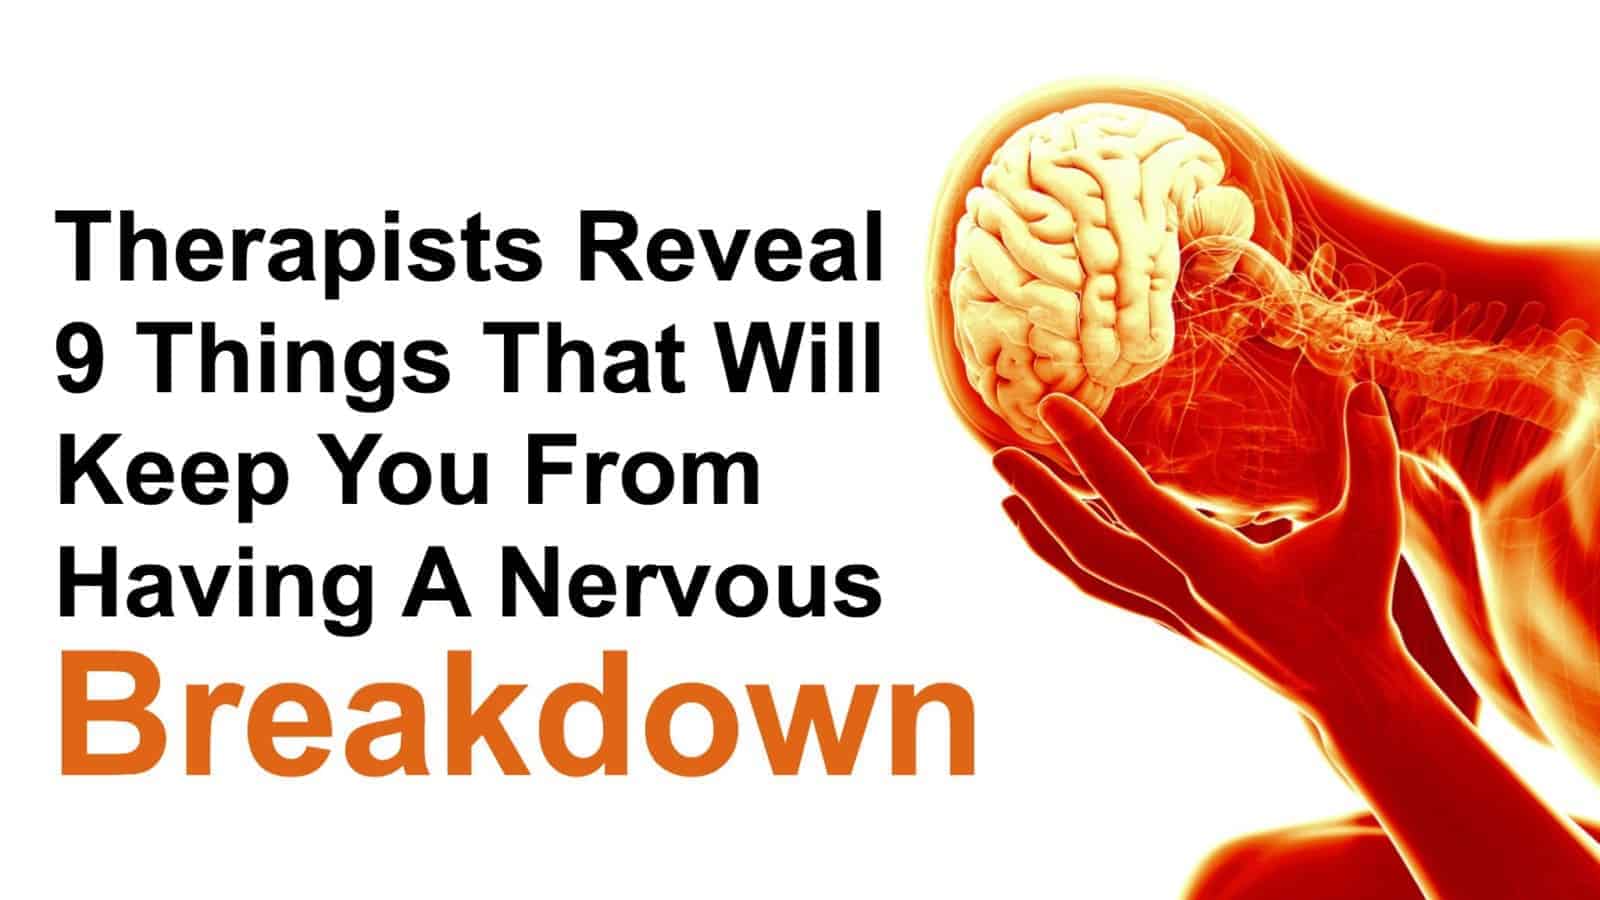 Therapists Reveal 9 Things That Will Keep You From Having A Nervous Breakdown